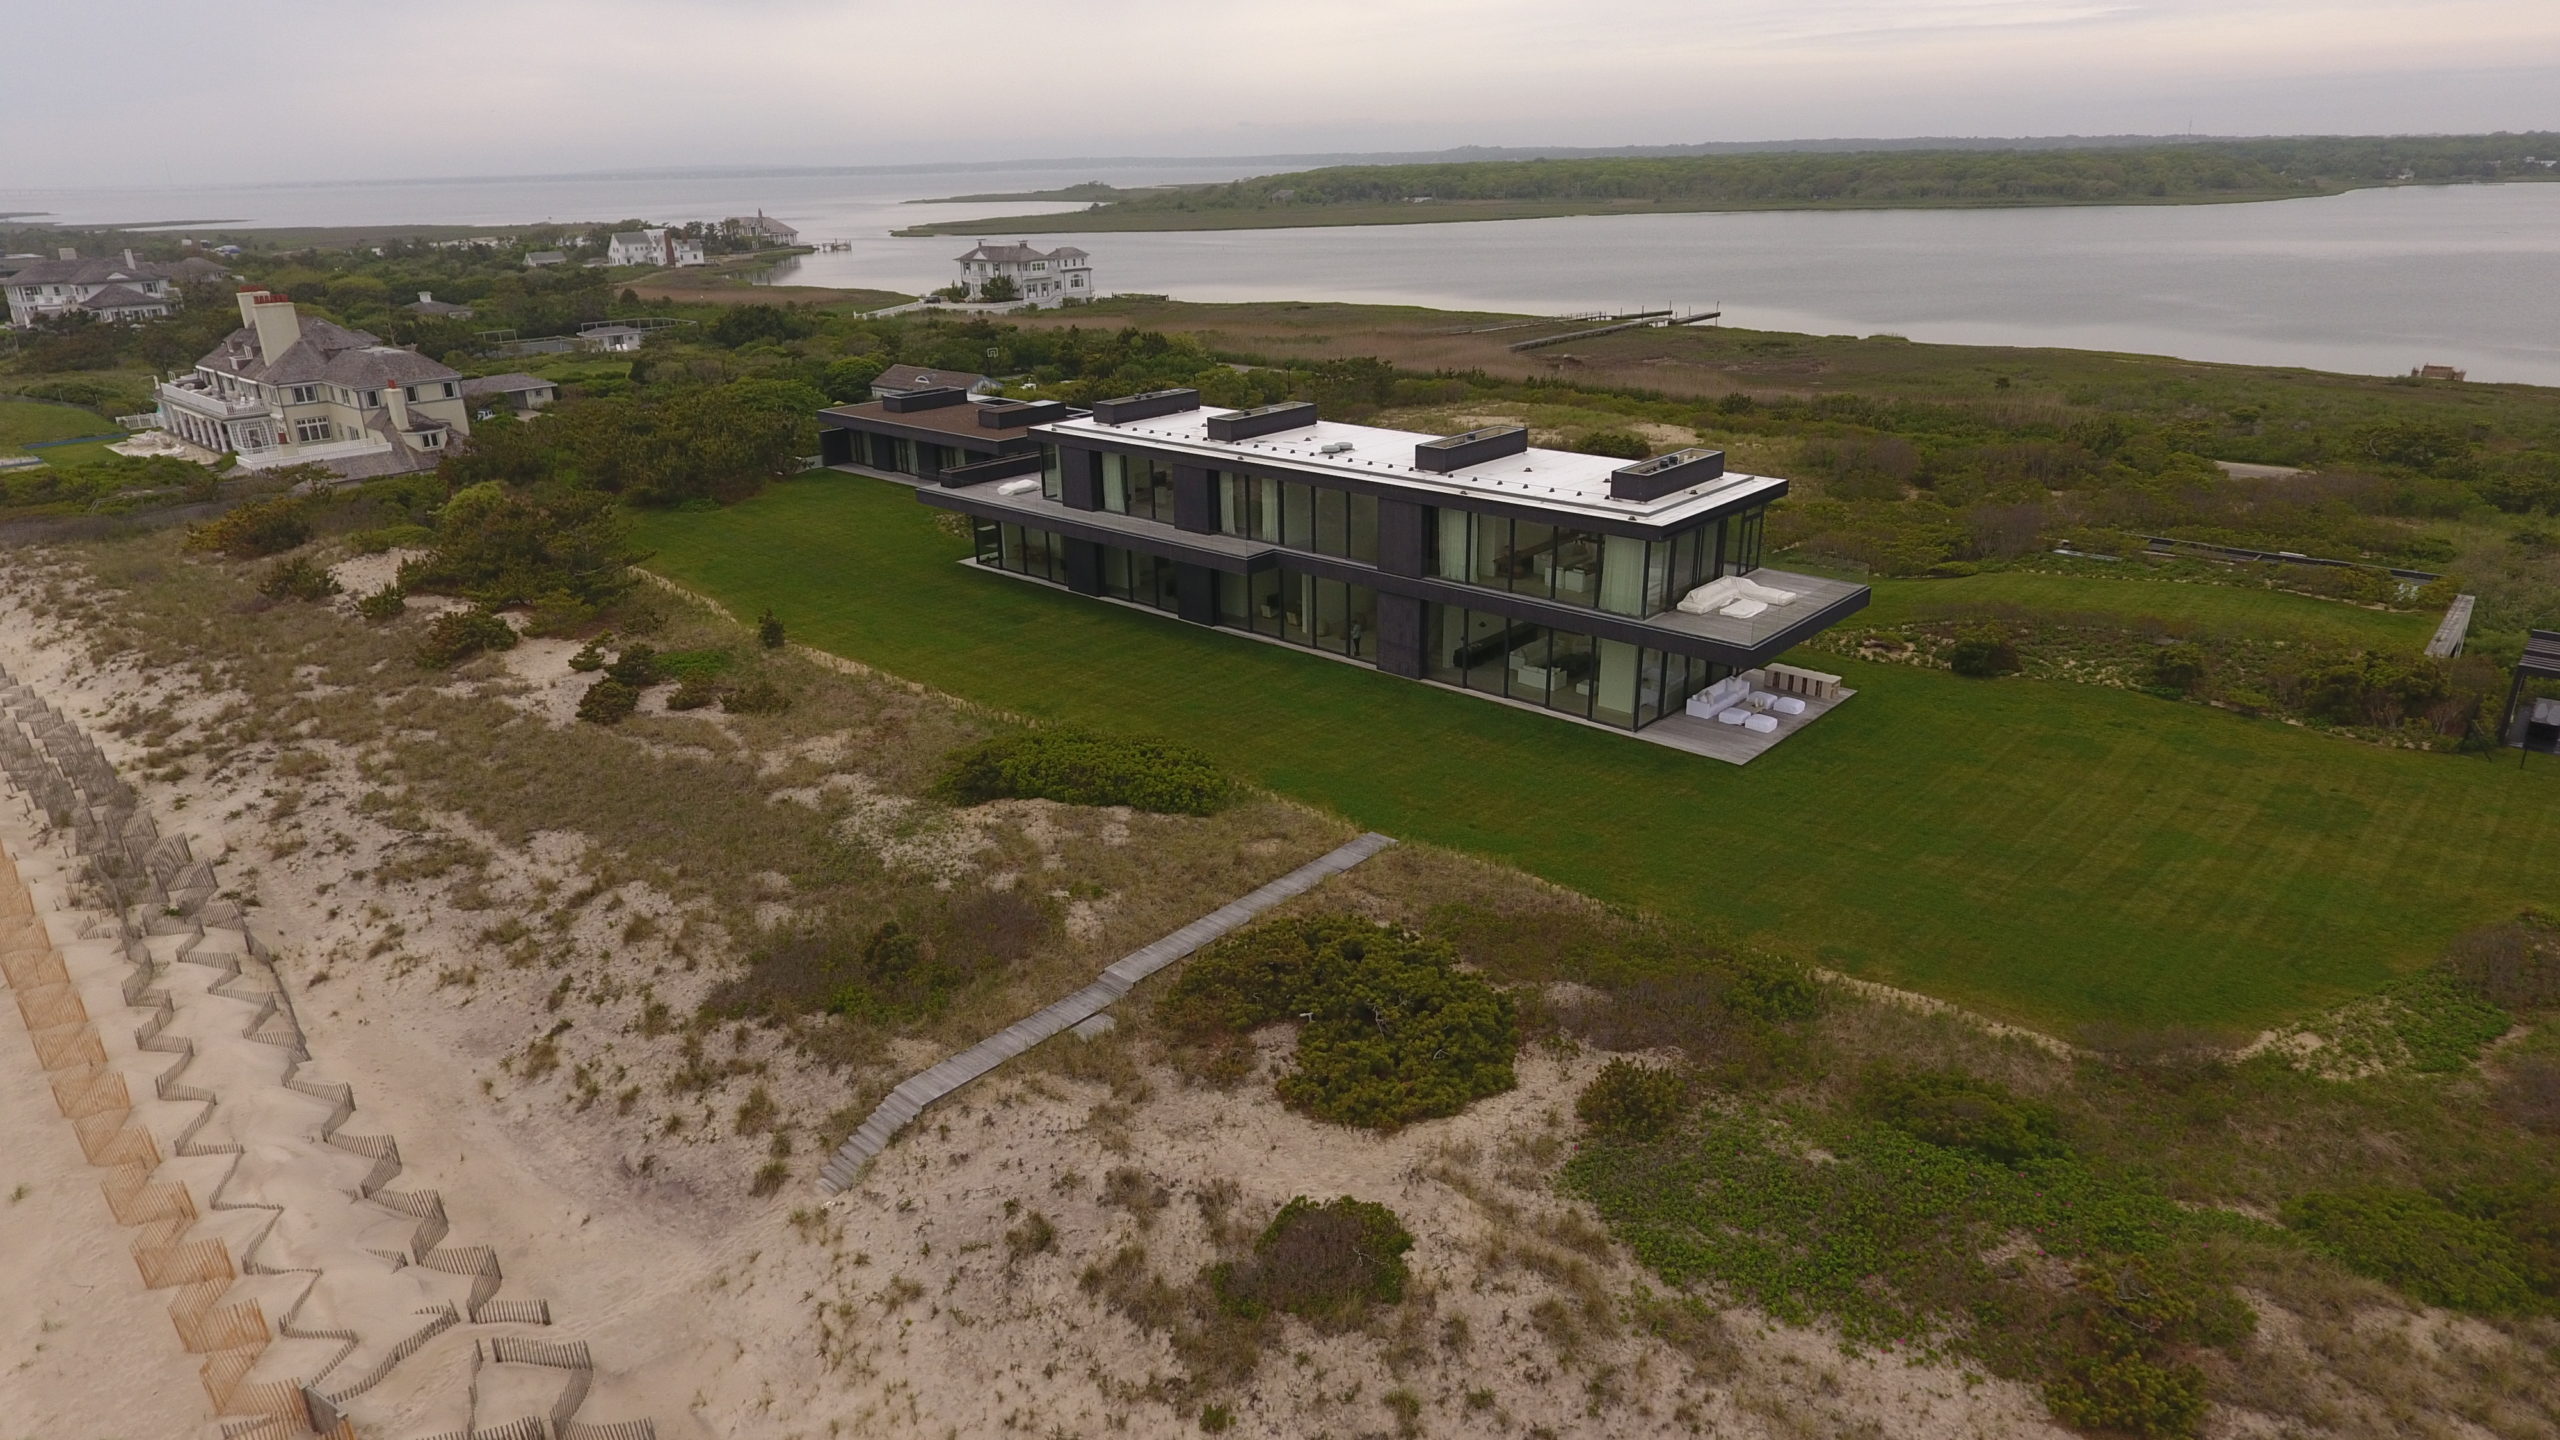 Calvin Klein sold his Southampton Village oceanfront estate in March for $84 million.